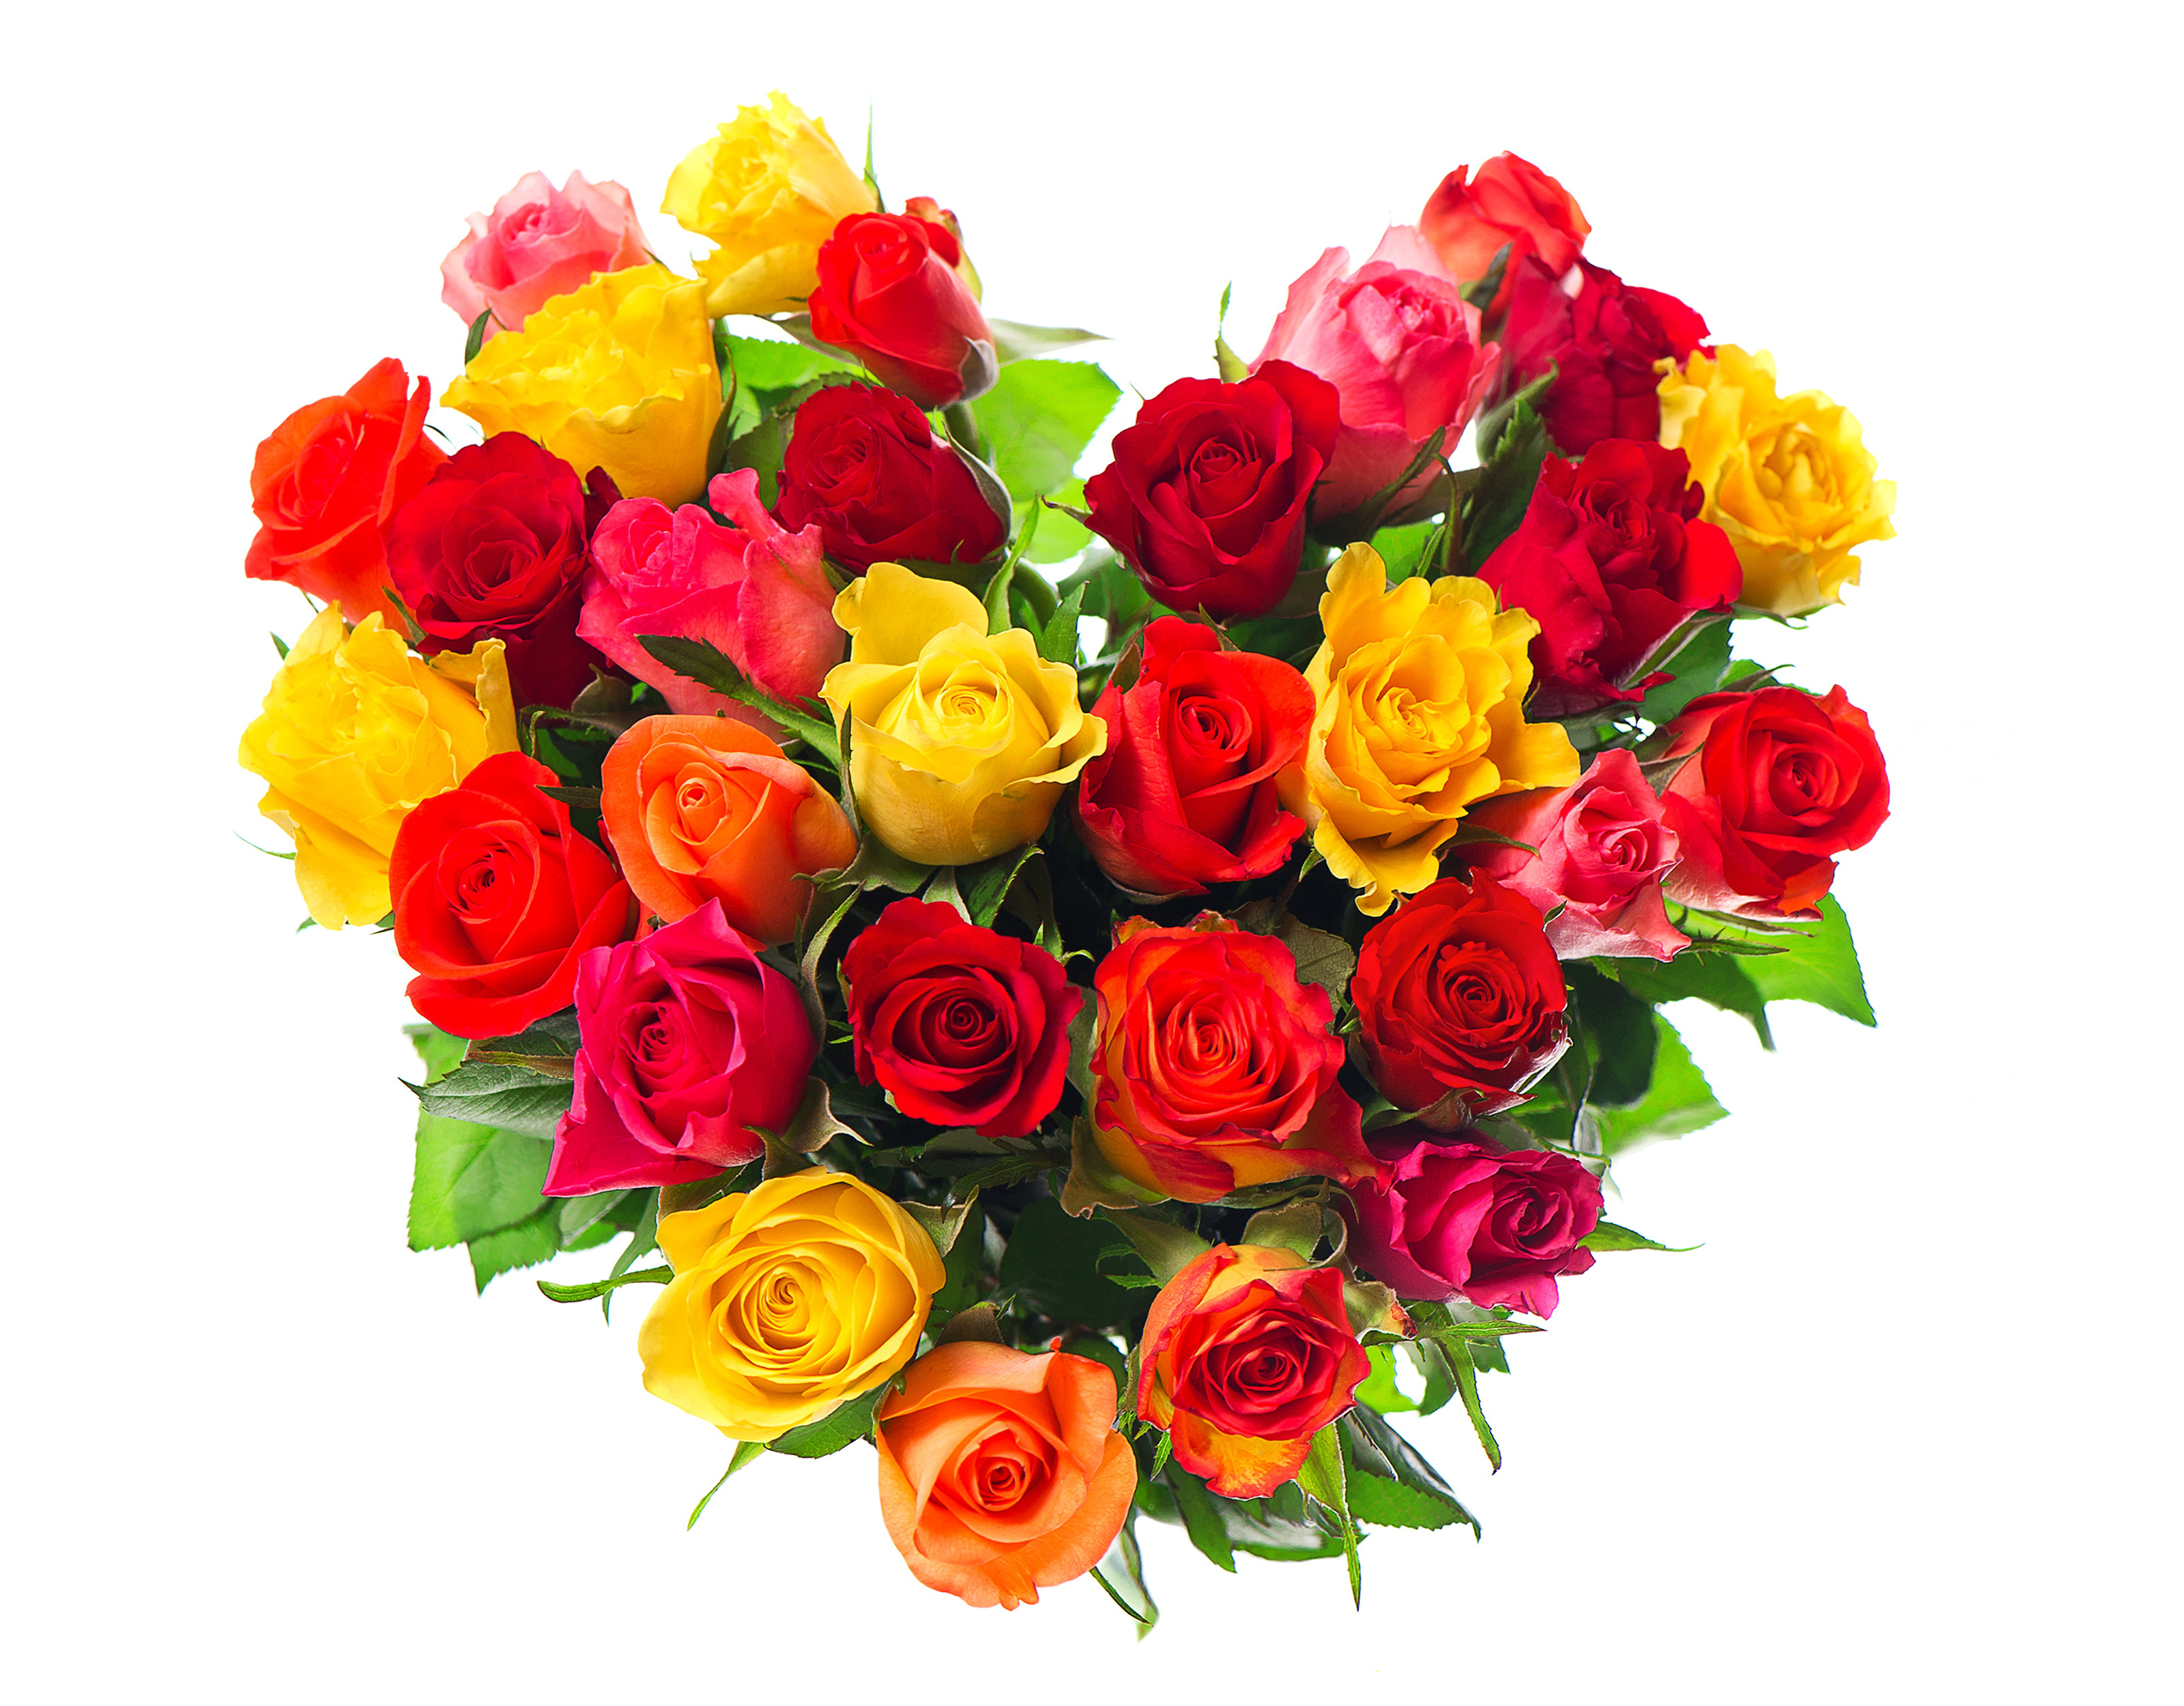 red rose, yellow rose, rose, heart, pink rose, holiday, valentine's day, colorful